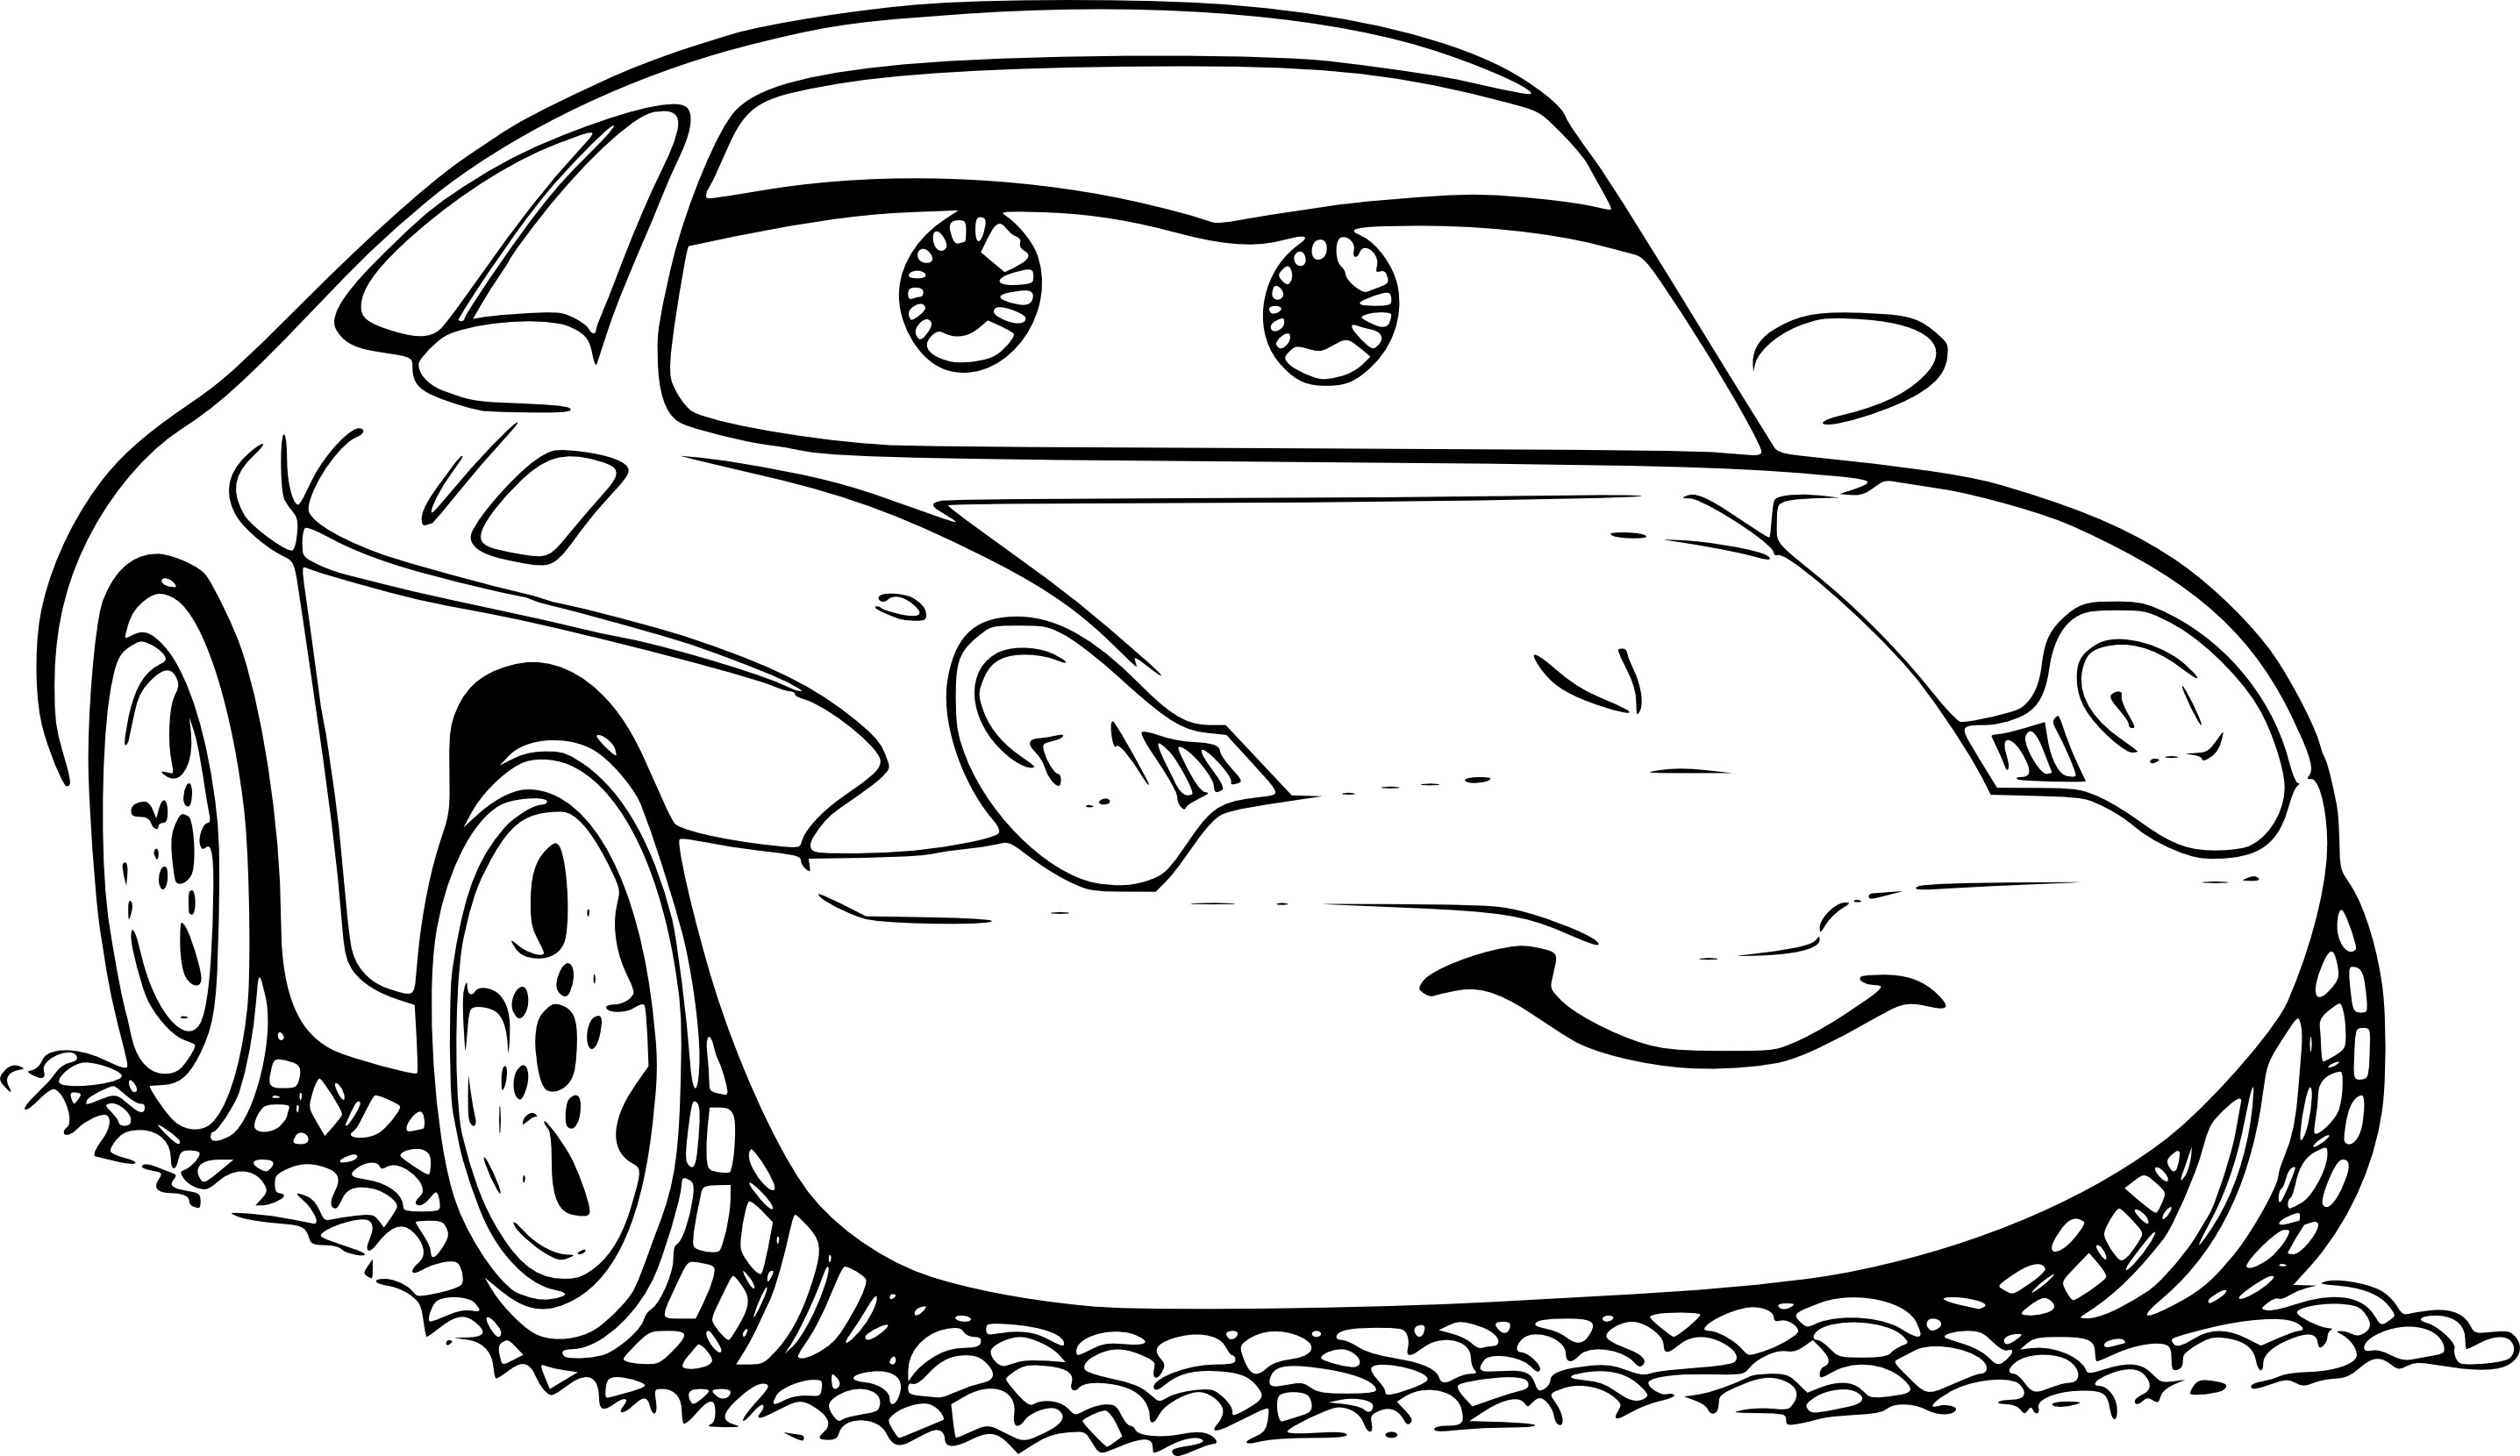 Flash Mcqueen coloring page